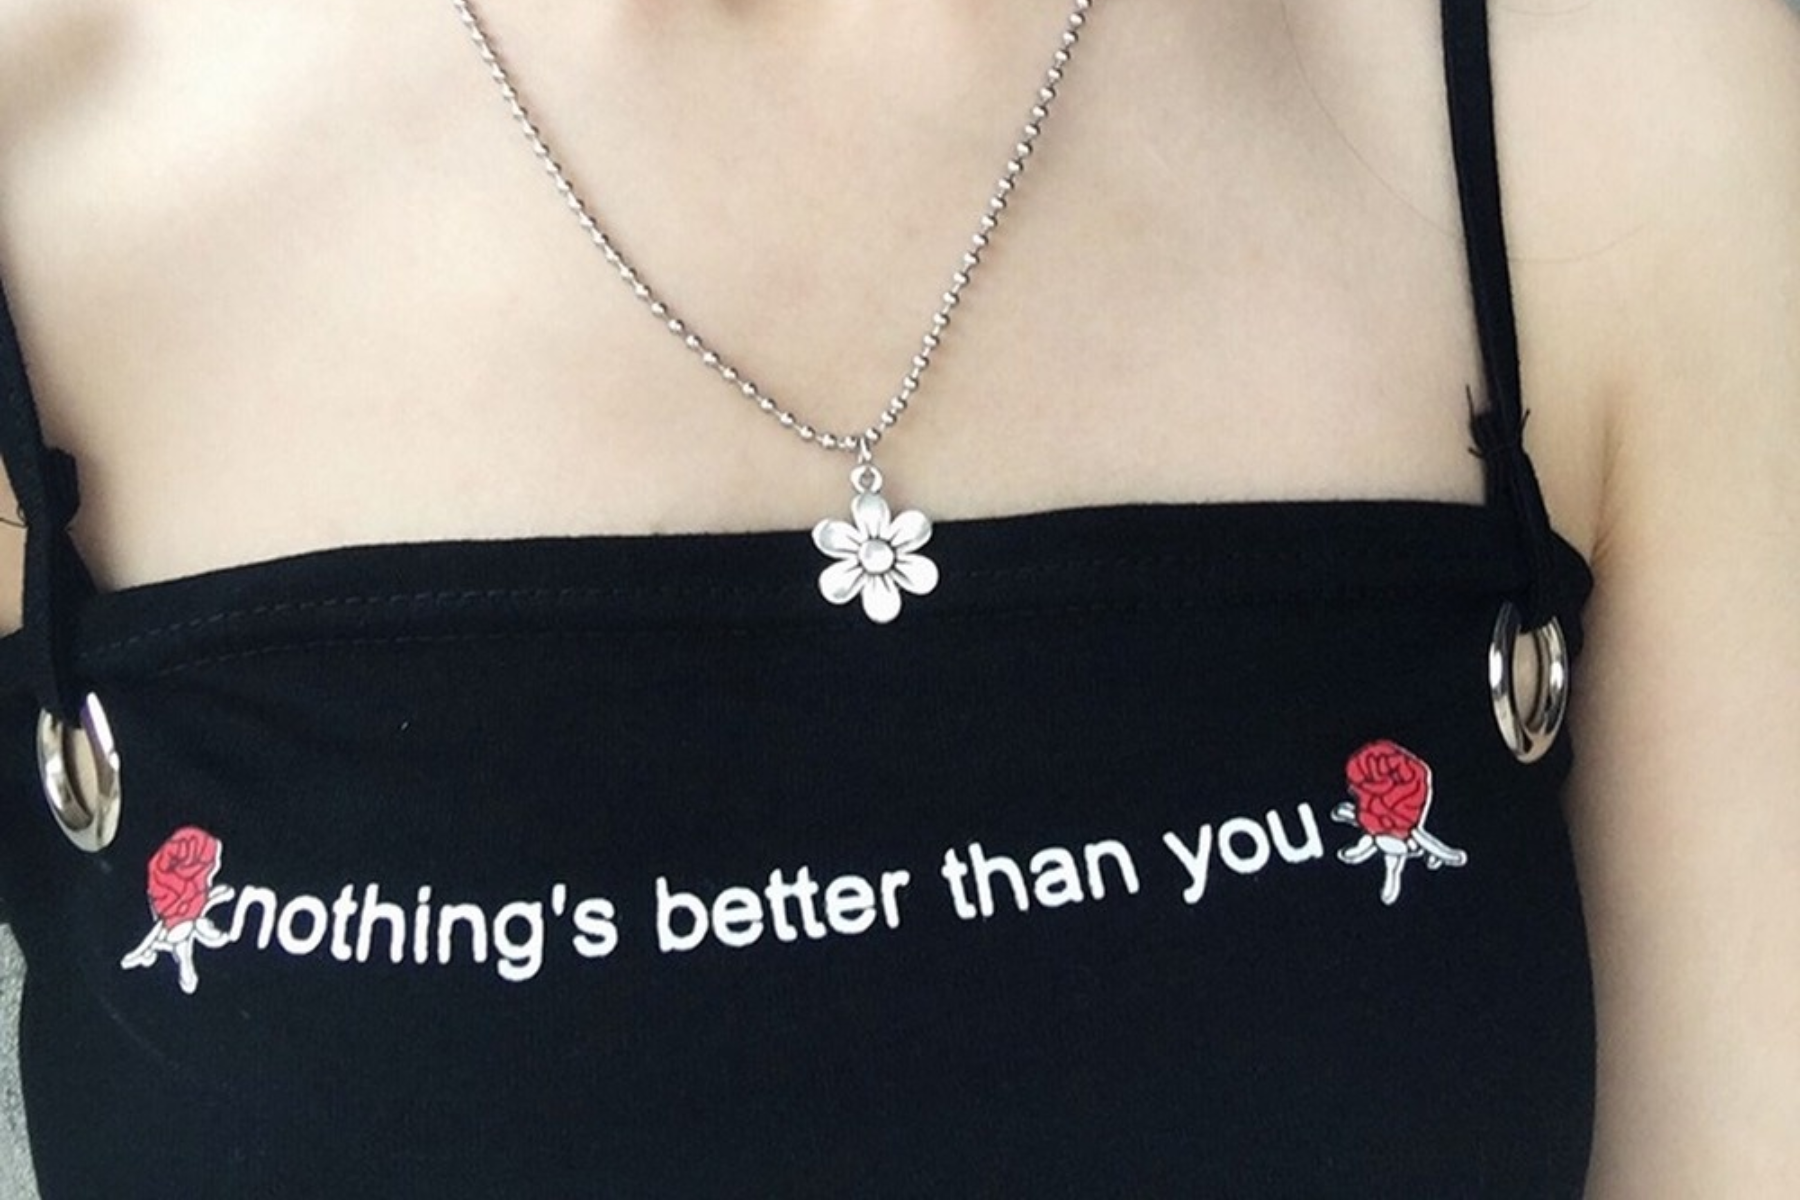 A woman wearing a simple black sleeveless shirt with the phrase "nothing's better than you" and a flower pendant